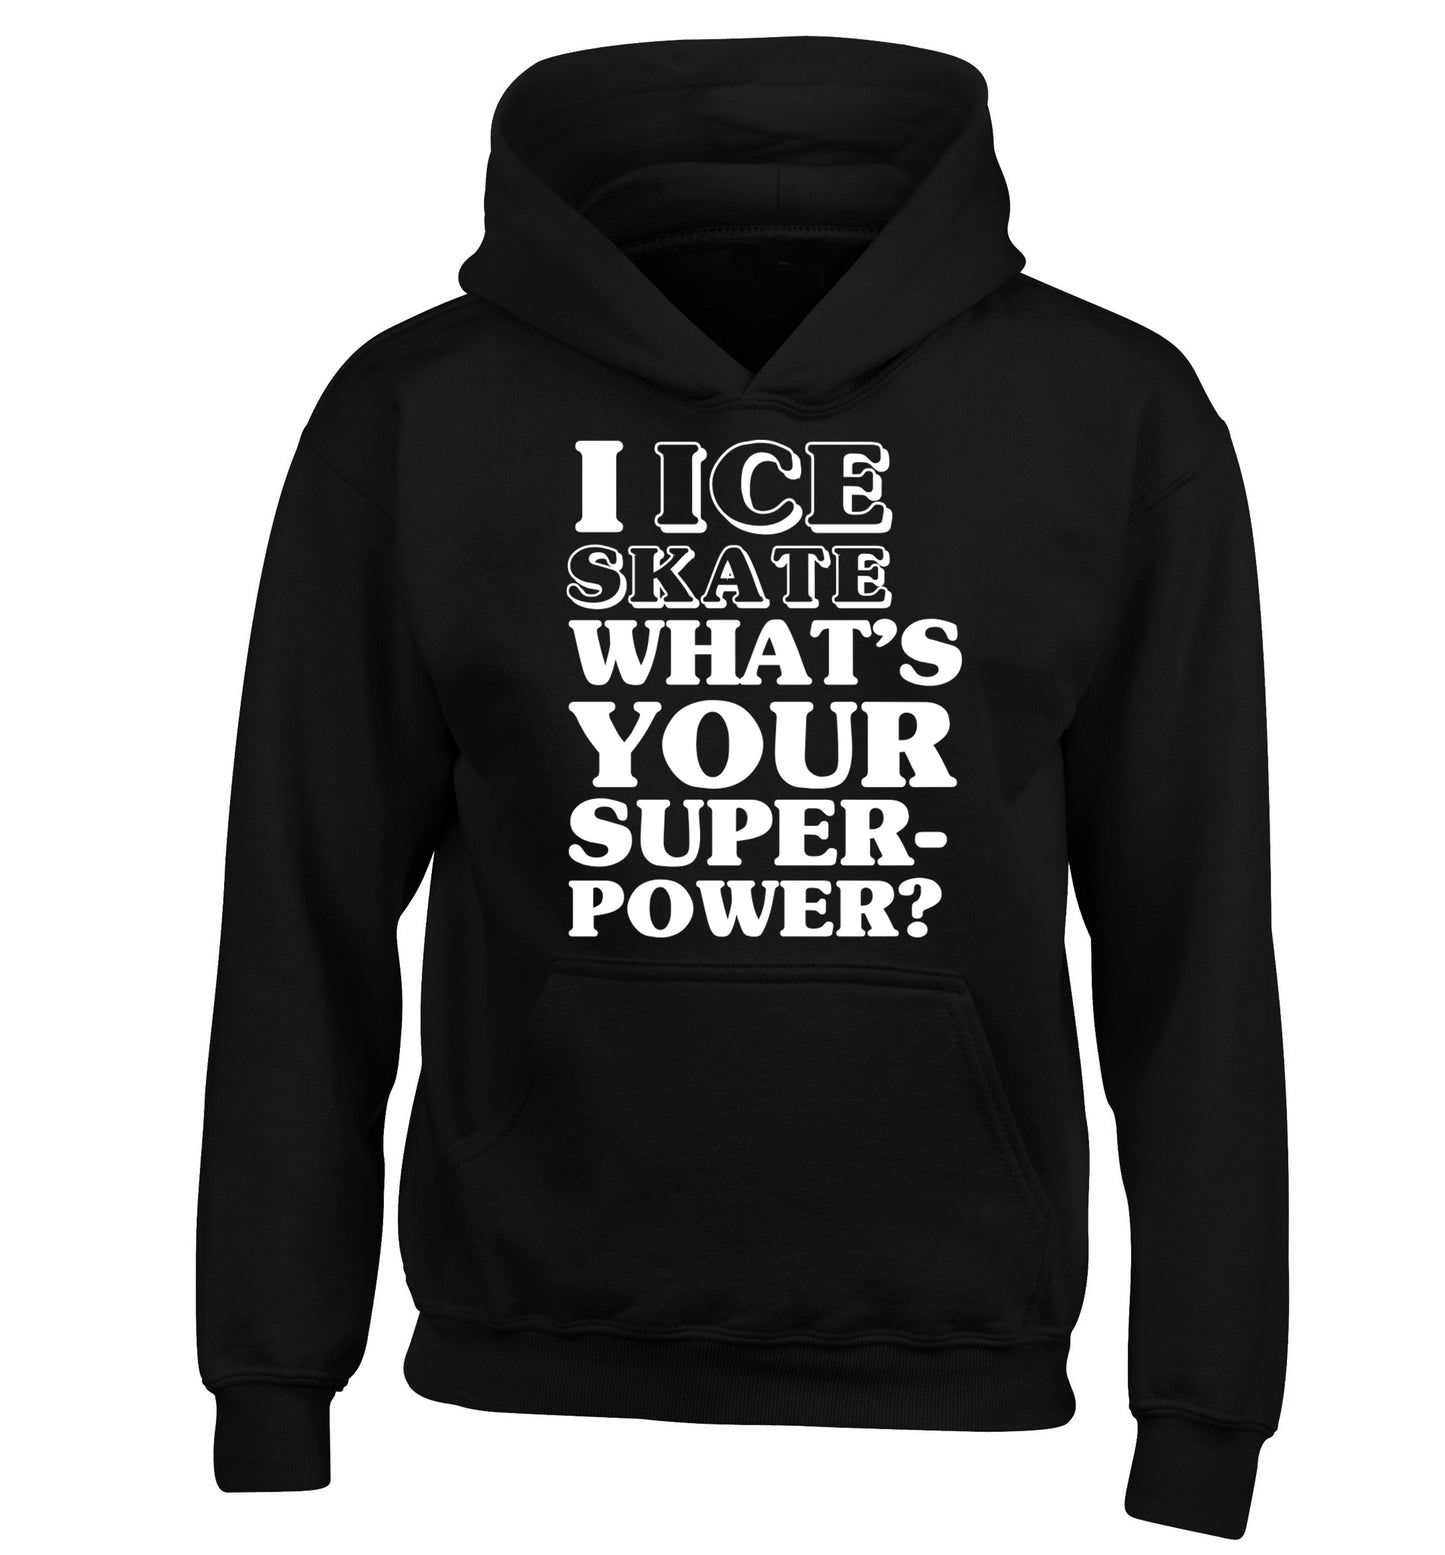 I ice skate what's your superpower? children's black hoodie 12-14 Years